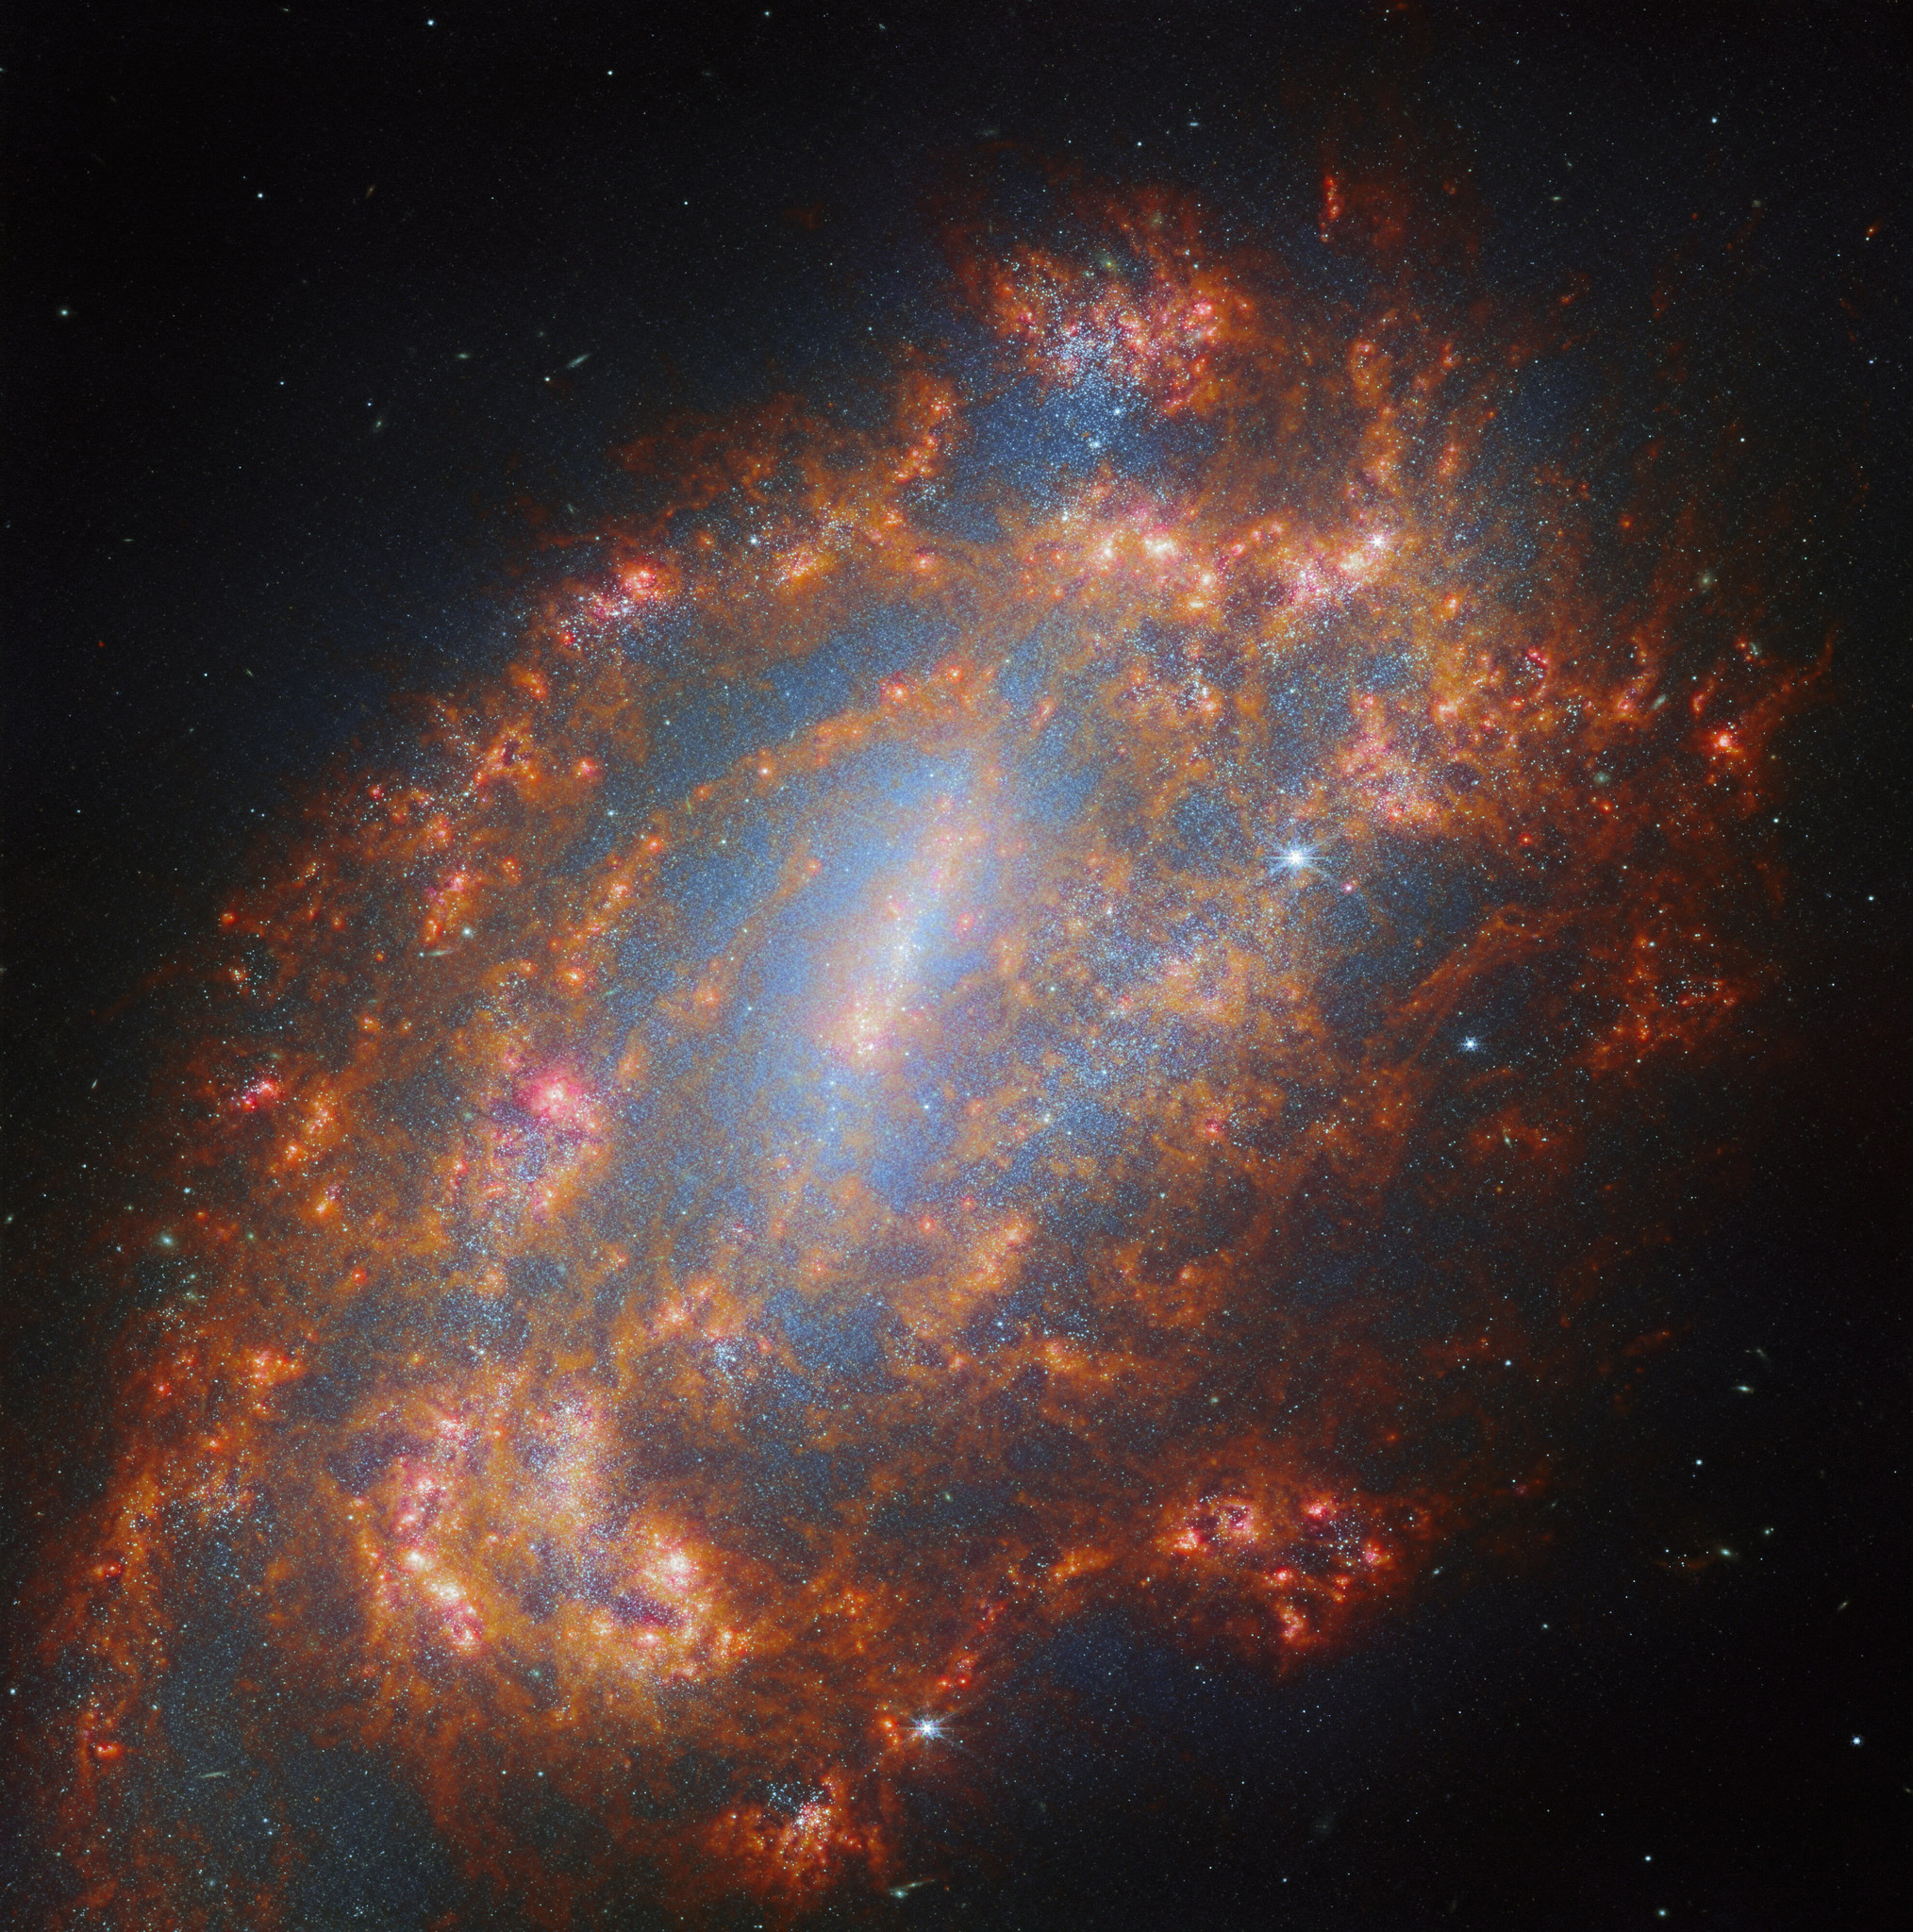 A barred spiral galaxy on a dark, almost blank background.  The entire galaxy glows with a pale blue light, especially along the galaxy's bar, which runs from top to bottom through the galaxy's core.  It is littered with little stars.  The center is surrounded by rich clouds of hot gas and dust along the arms.  The coral-colored arms are loosely wound and a bit ragged, and contain some star-forming regions that shine brightly